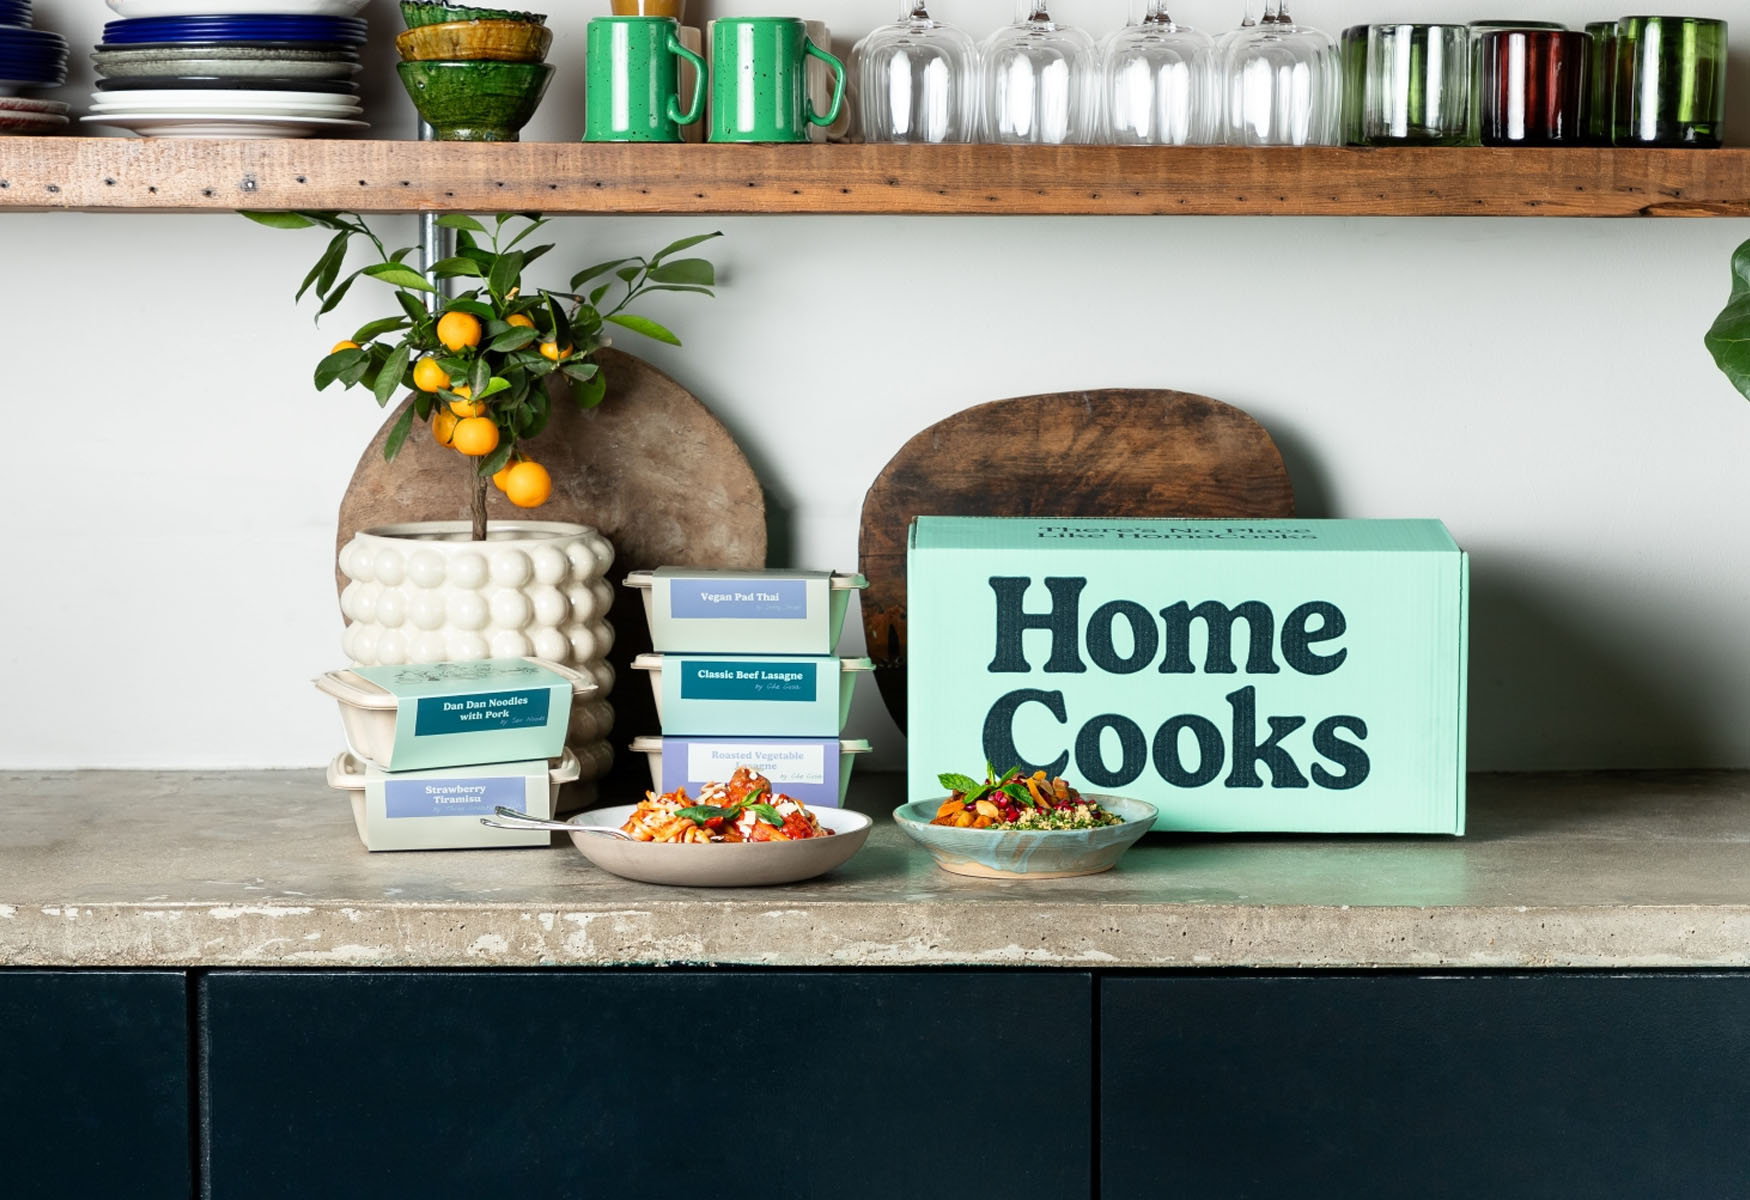 HomeCooks Raises $3.2M In Seed Funding For Its Marketplace For Chefs